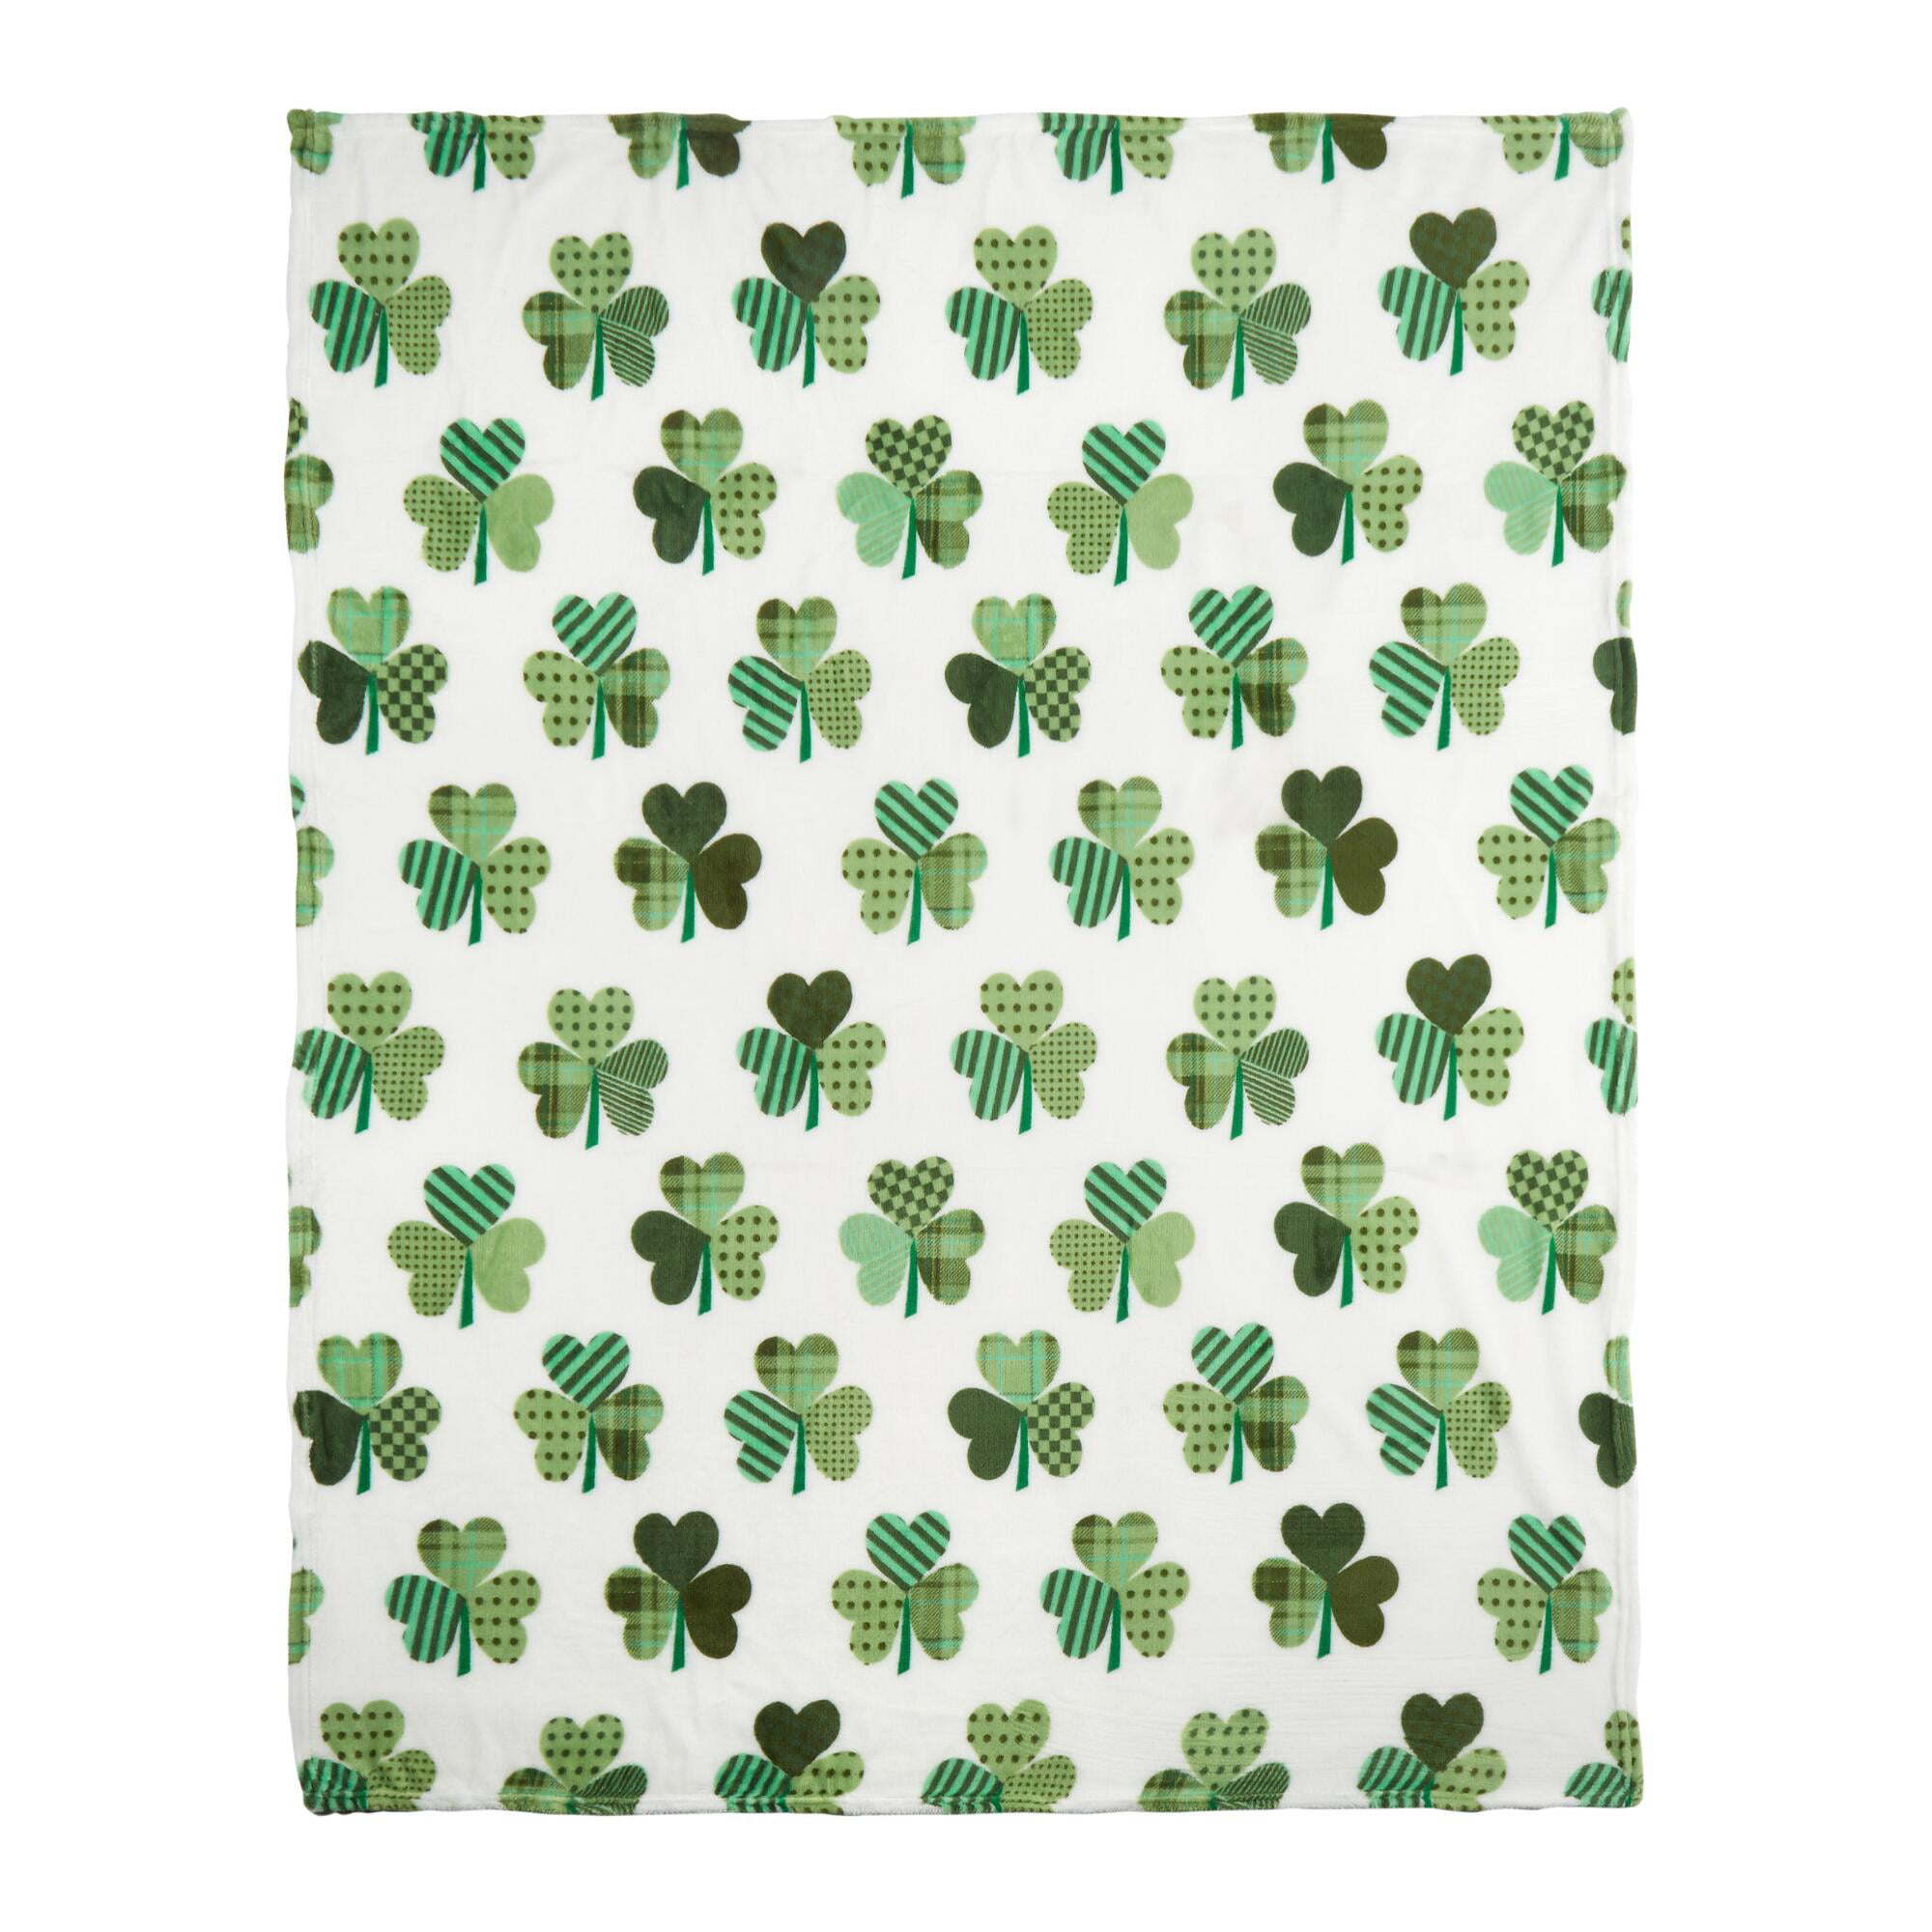 rouihot 60x80 Inches Flannel Throw Blanket Green Cartoon Clover Leaves for St Patrick Day Four Home Decorative Warm Cozy Soft Blanket for Couch Sofa Bed 